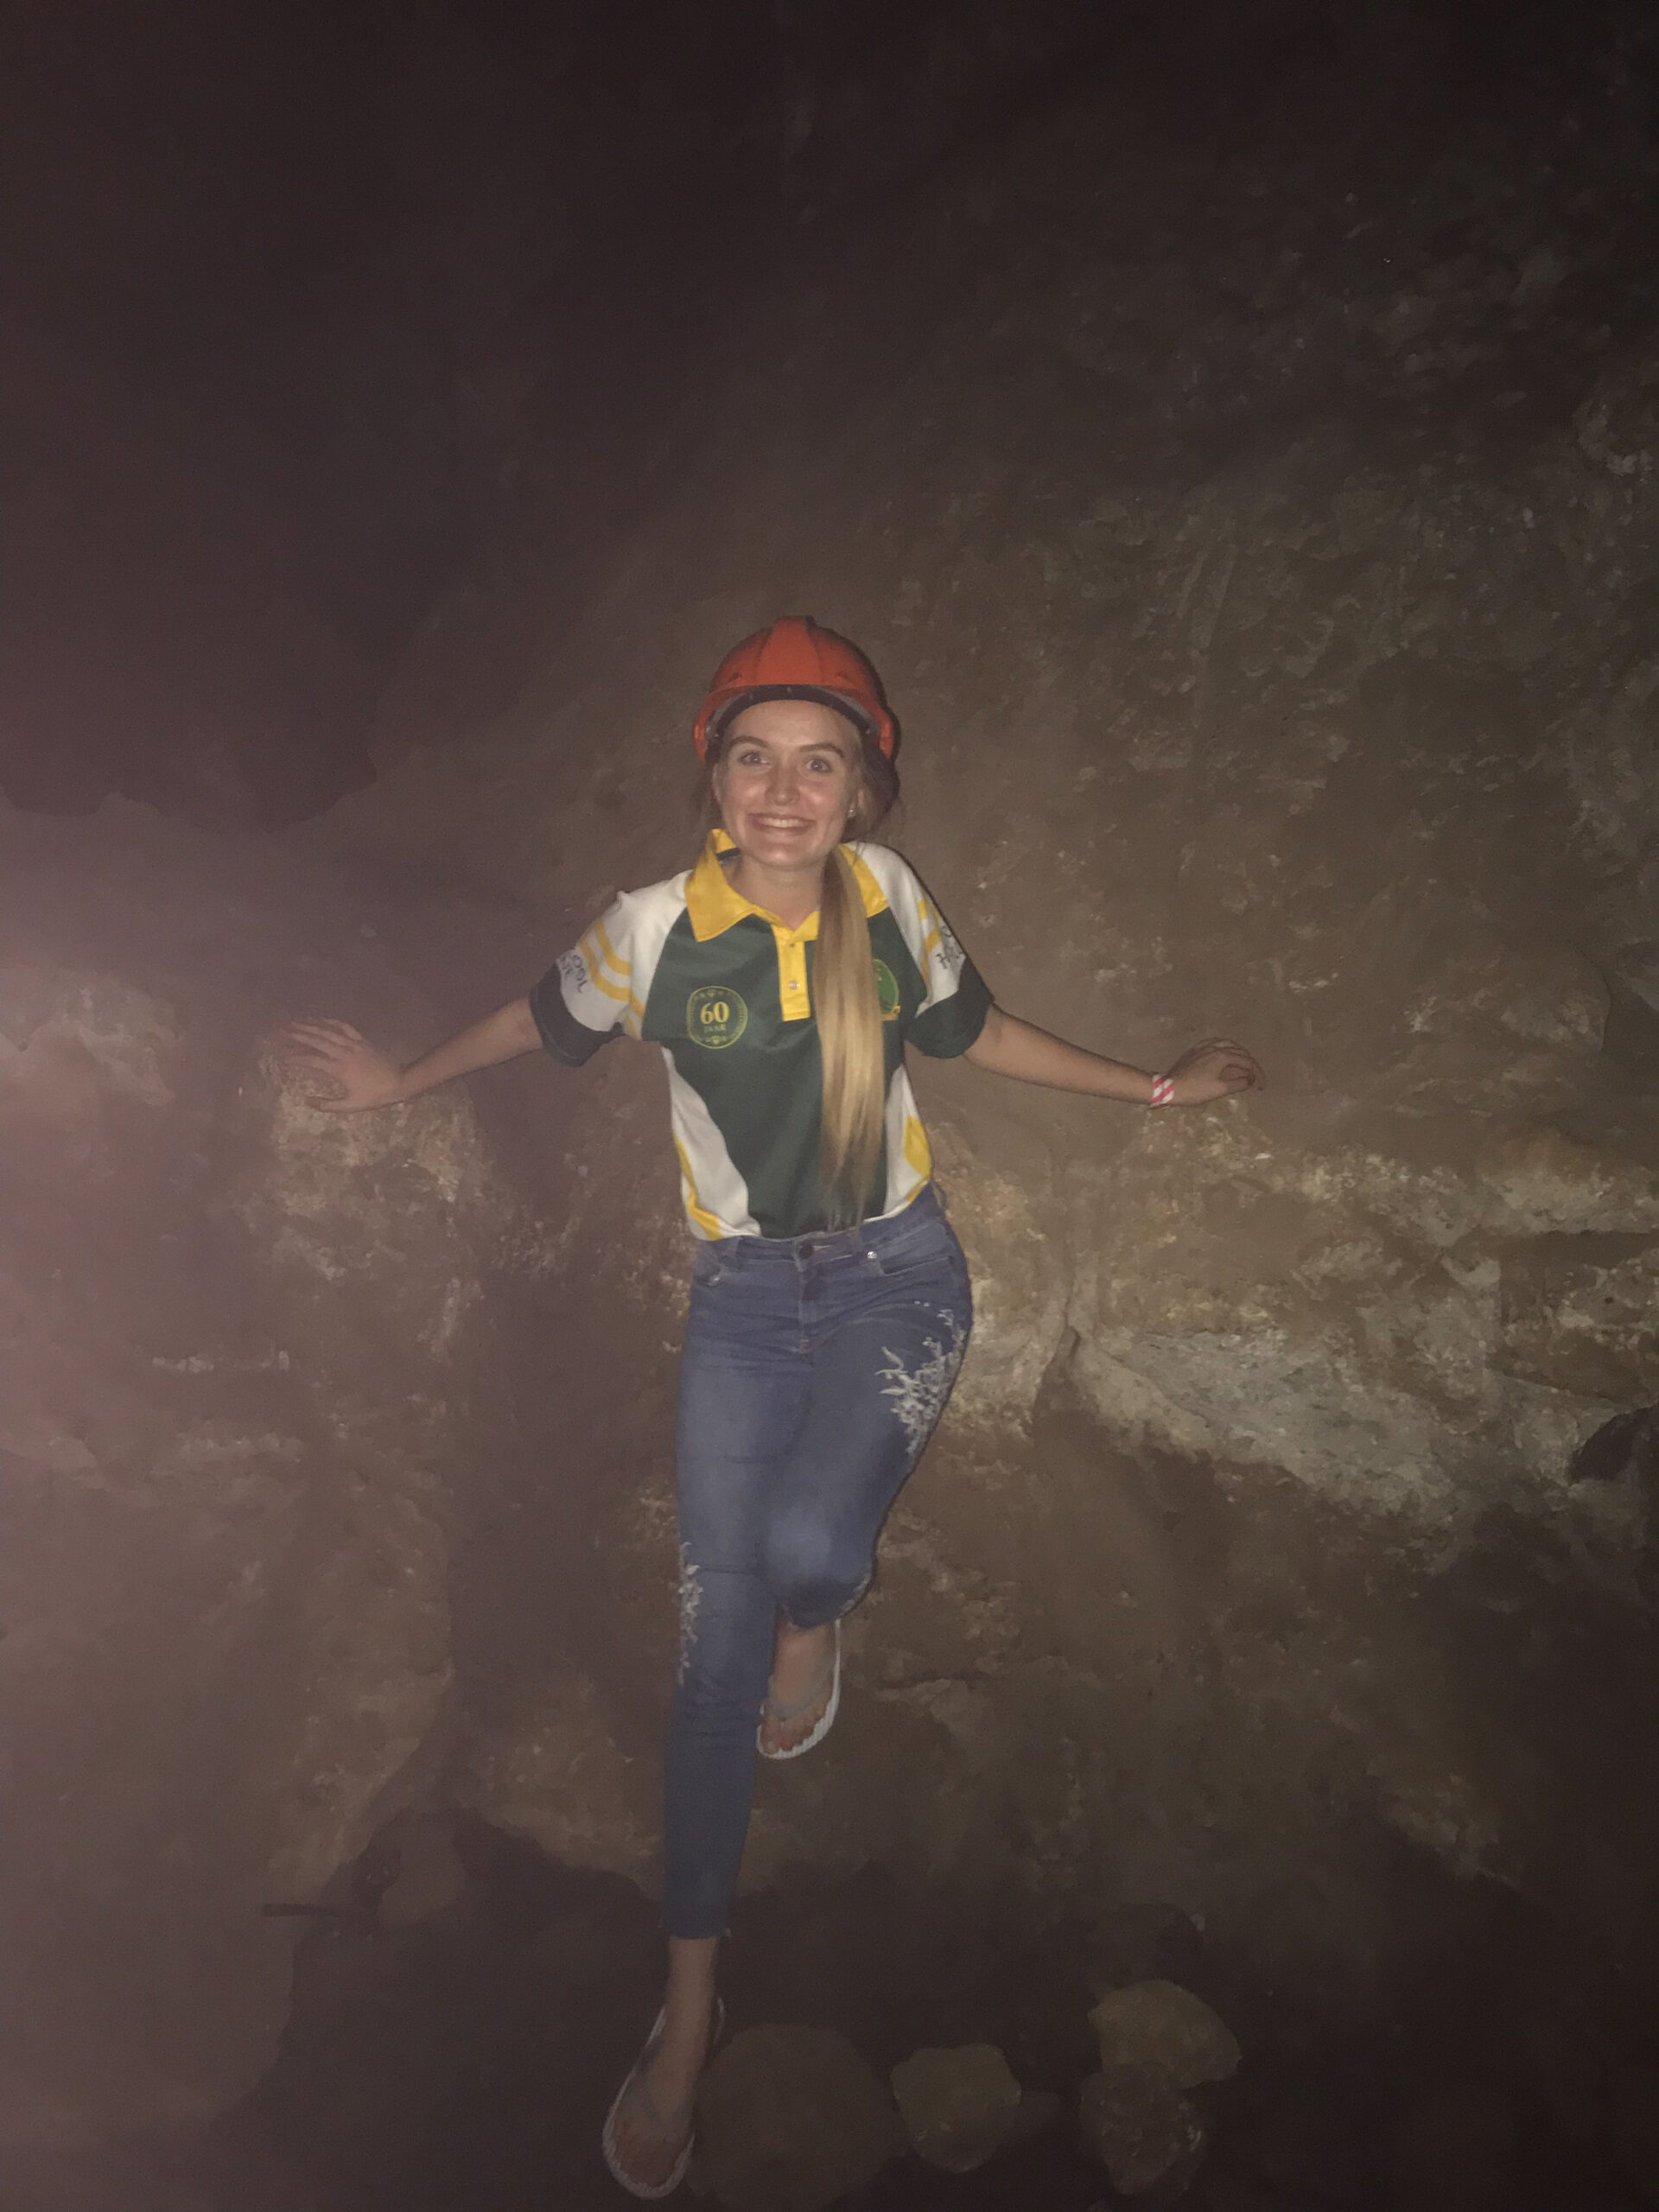 RESESS Satellite Intern Courteney Pike smiles in the Sterkfontein Caves, wearing a hard hat.